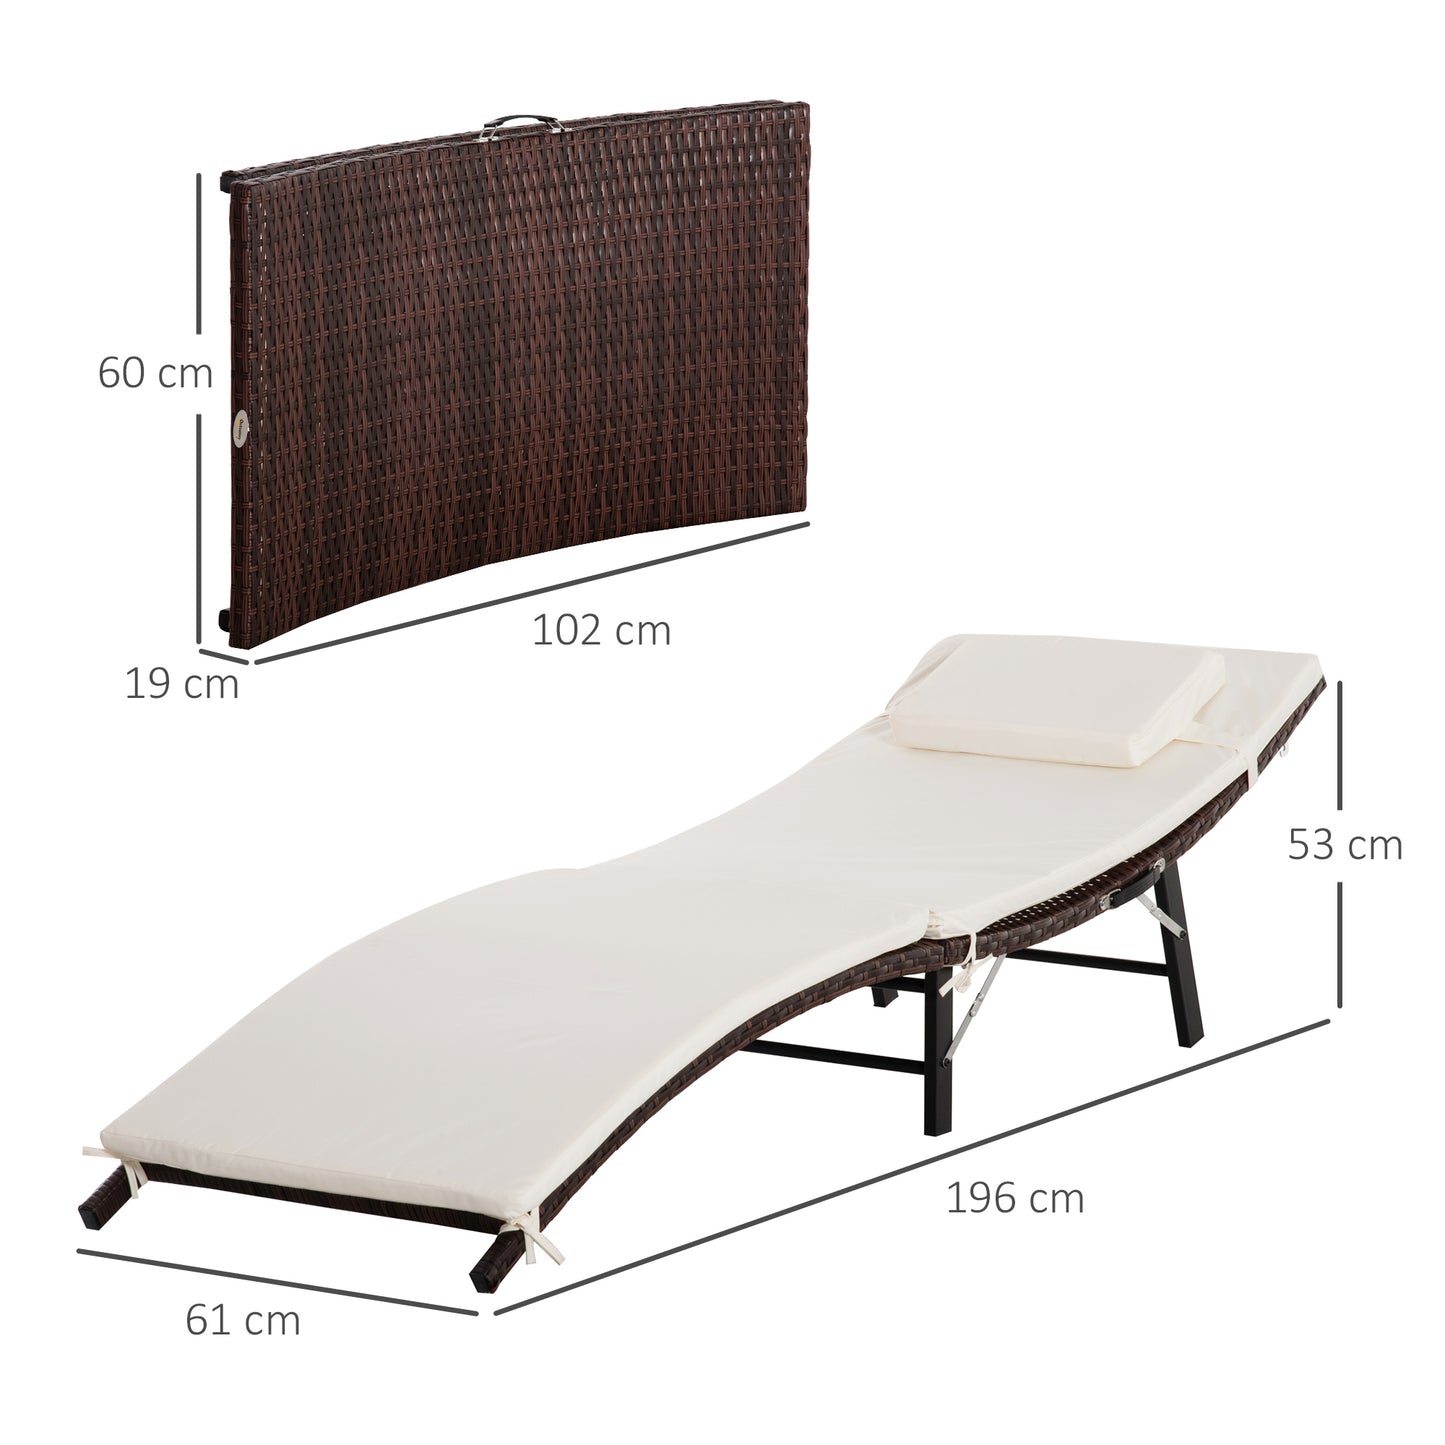 Outsunny Rattan Garden Furniture Folding Sun Lounger Outdoor Chair Wicker Weave Bed with Cushion and Pillow Brown